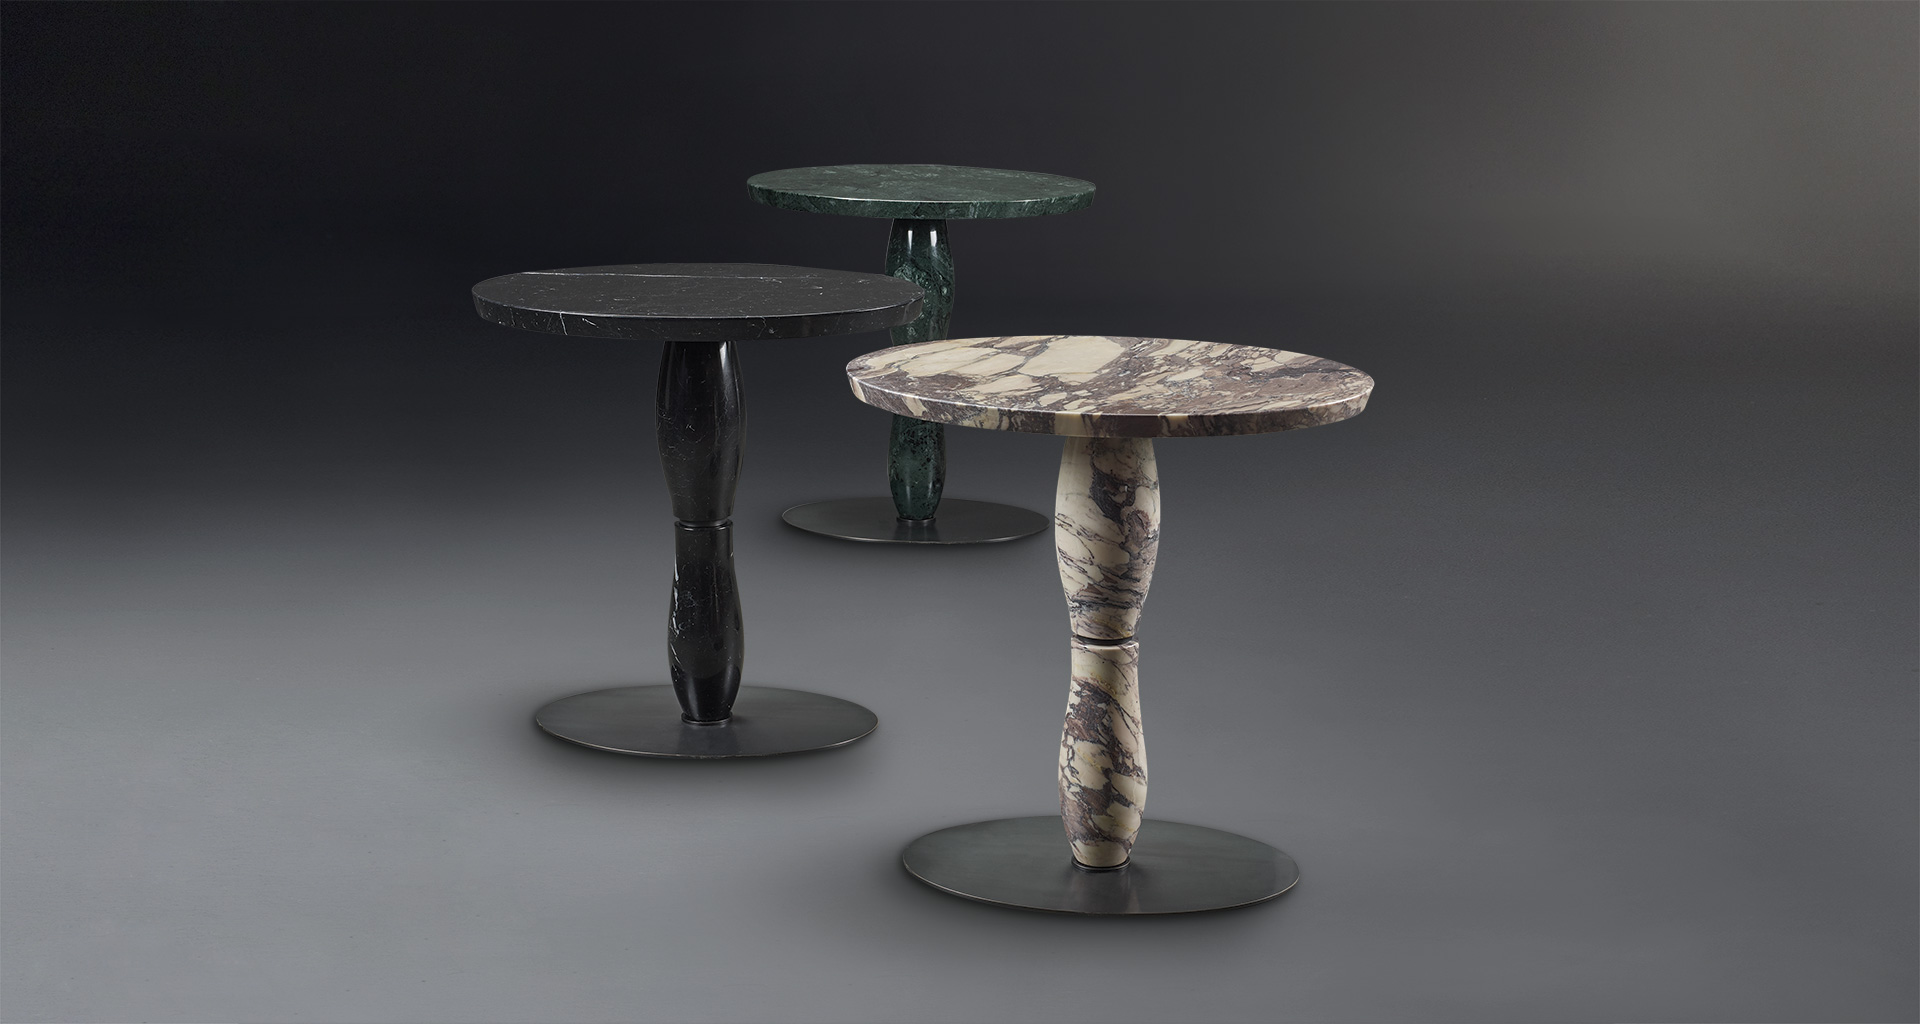 Mediterranée is a small table available in marble, from Promemoria's Capsule Collection by Olivier Gagnère | Promemoria